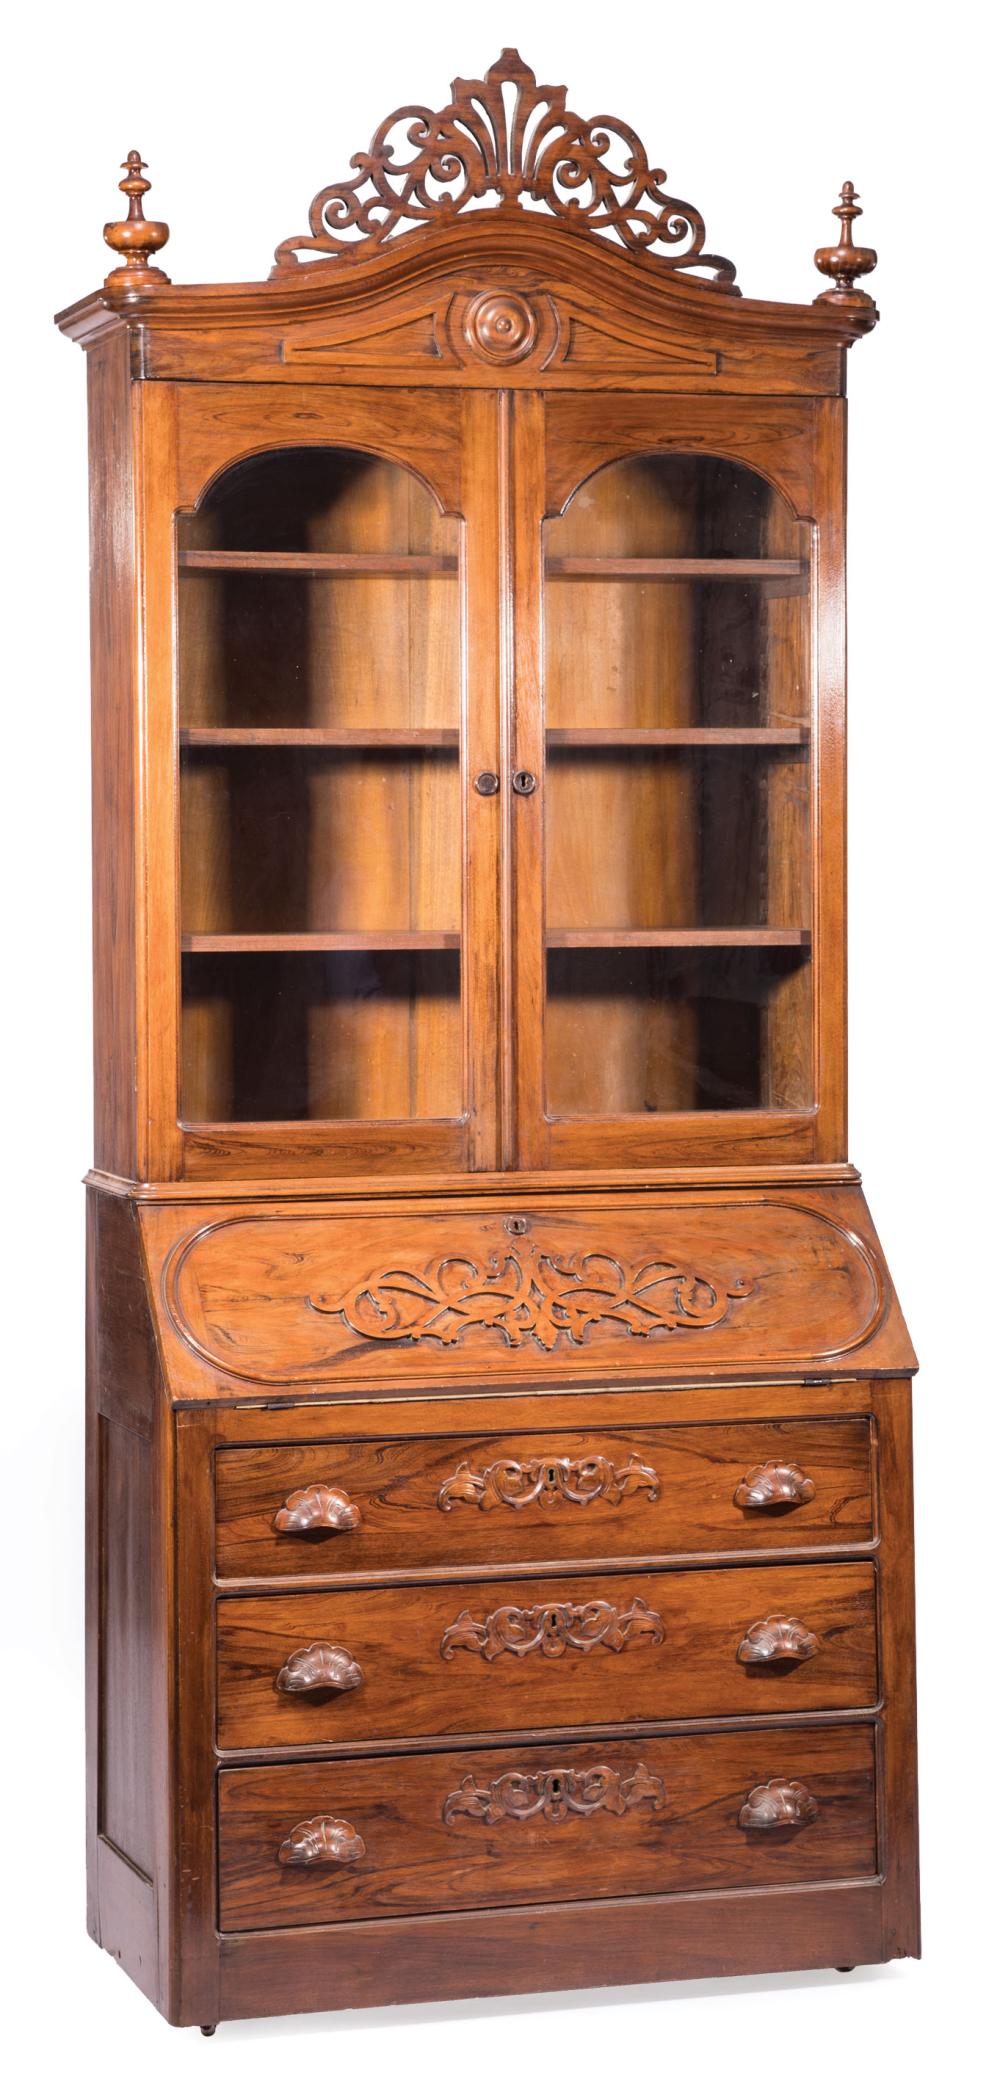 CARVED ROSEWOOD AND GRAINED SECRETARY 31a0ea